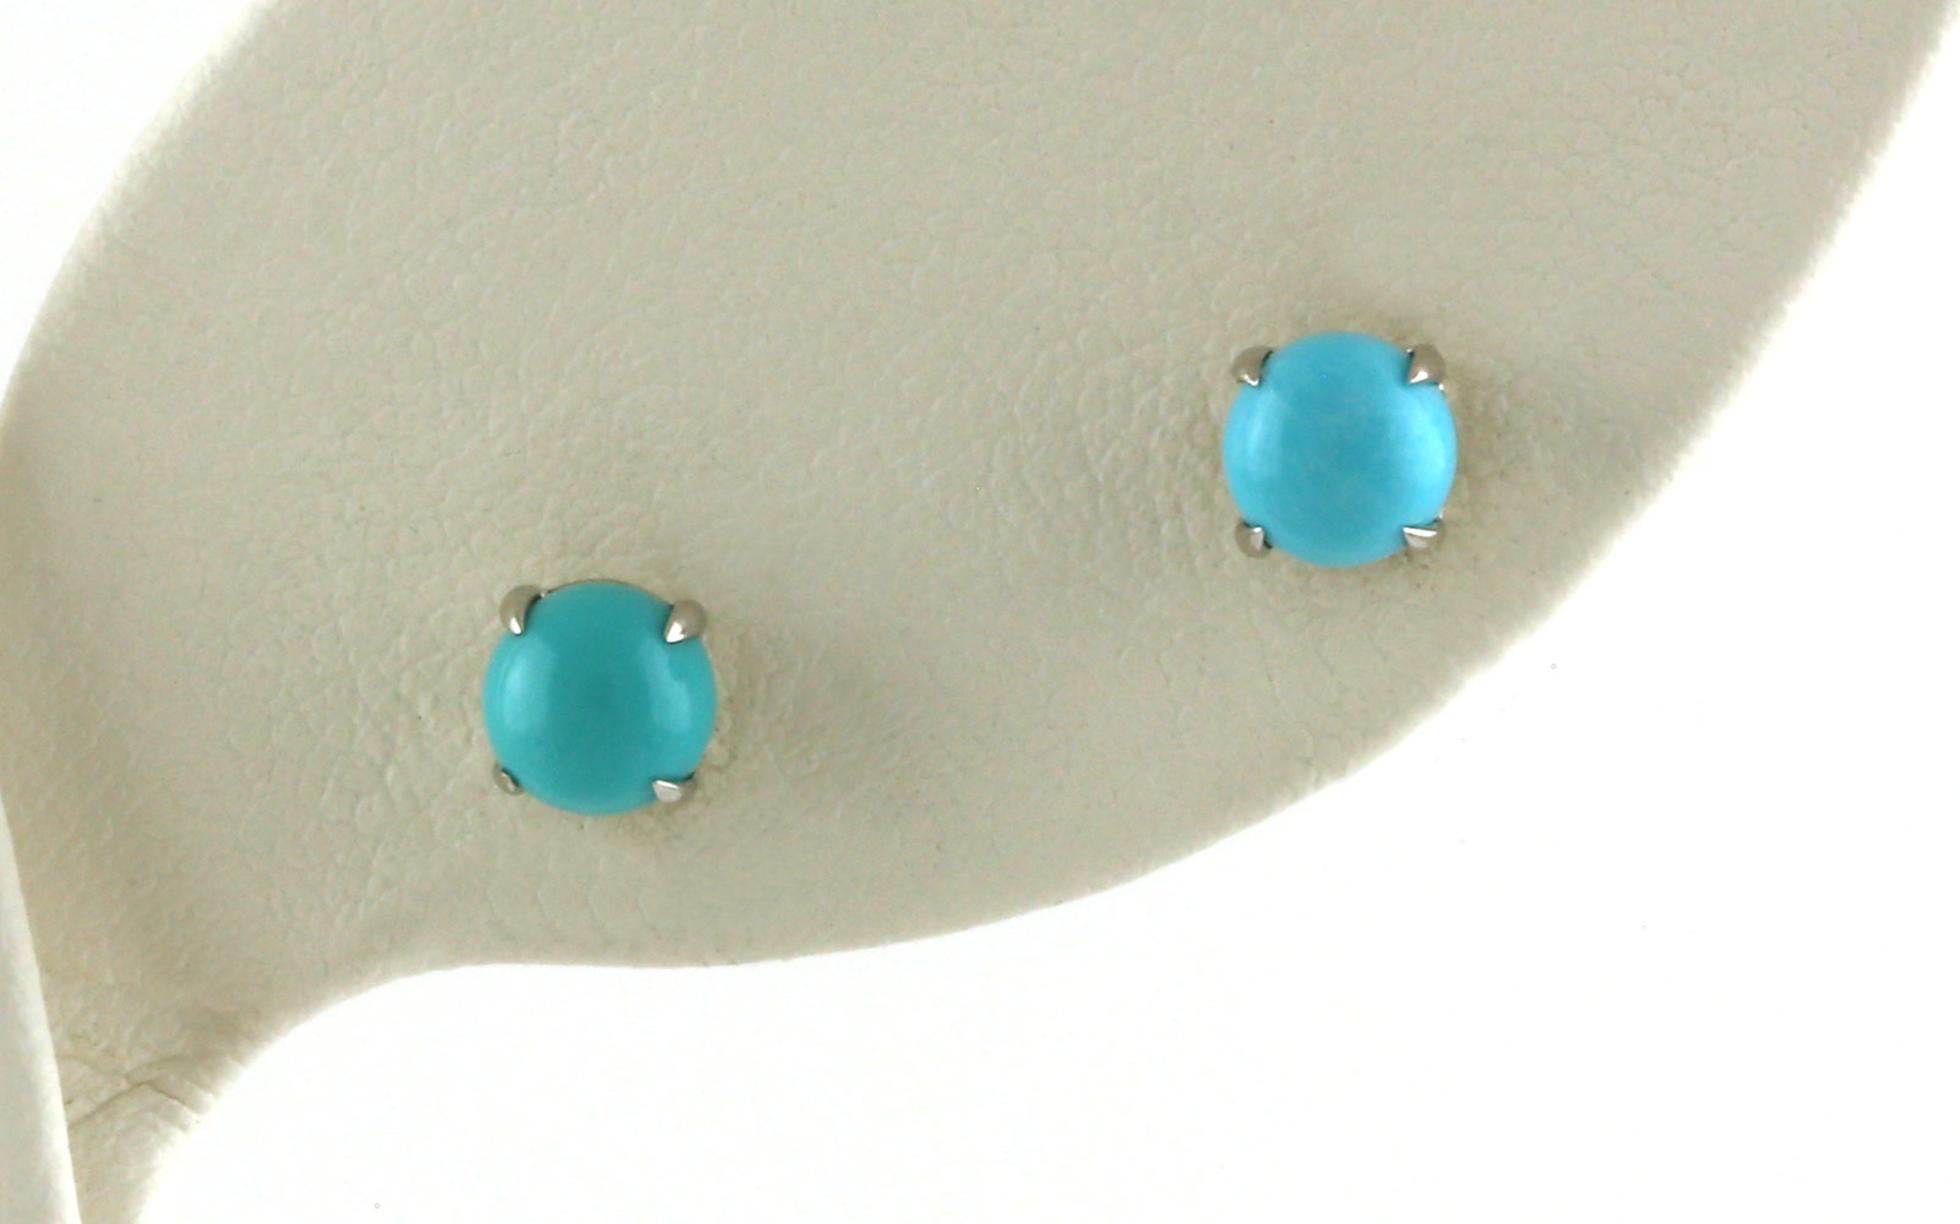 Cabochon Turquoise Stud Earrings in White Gold (1.03cts TWT)